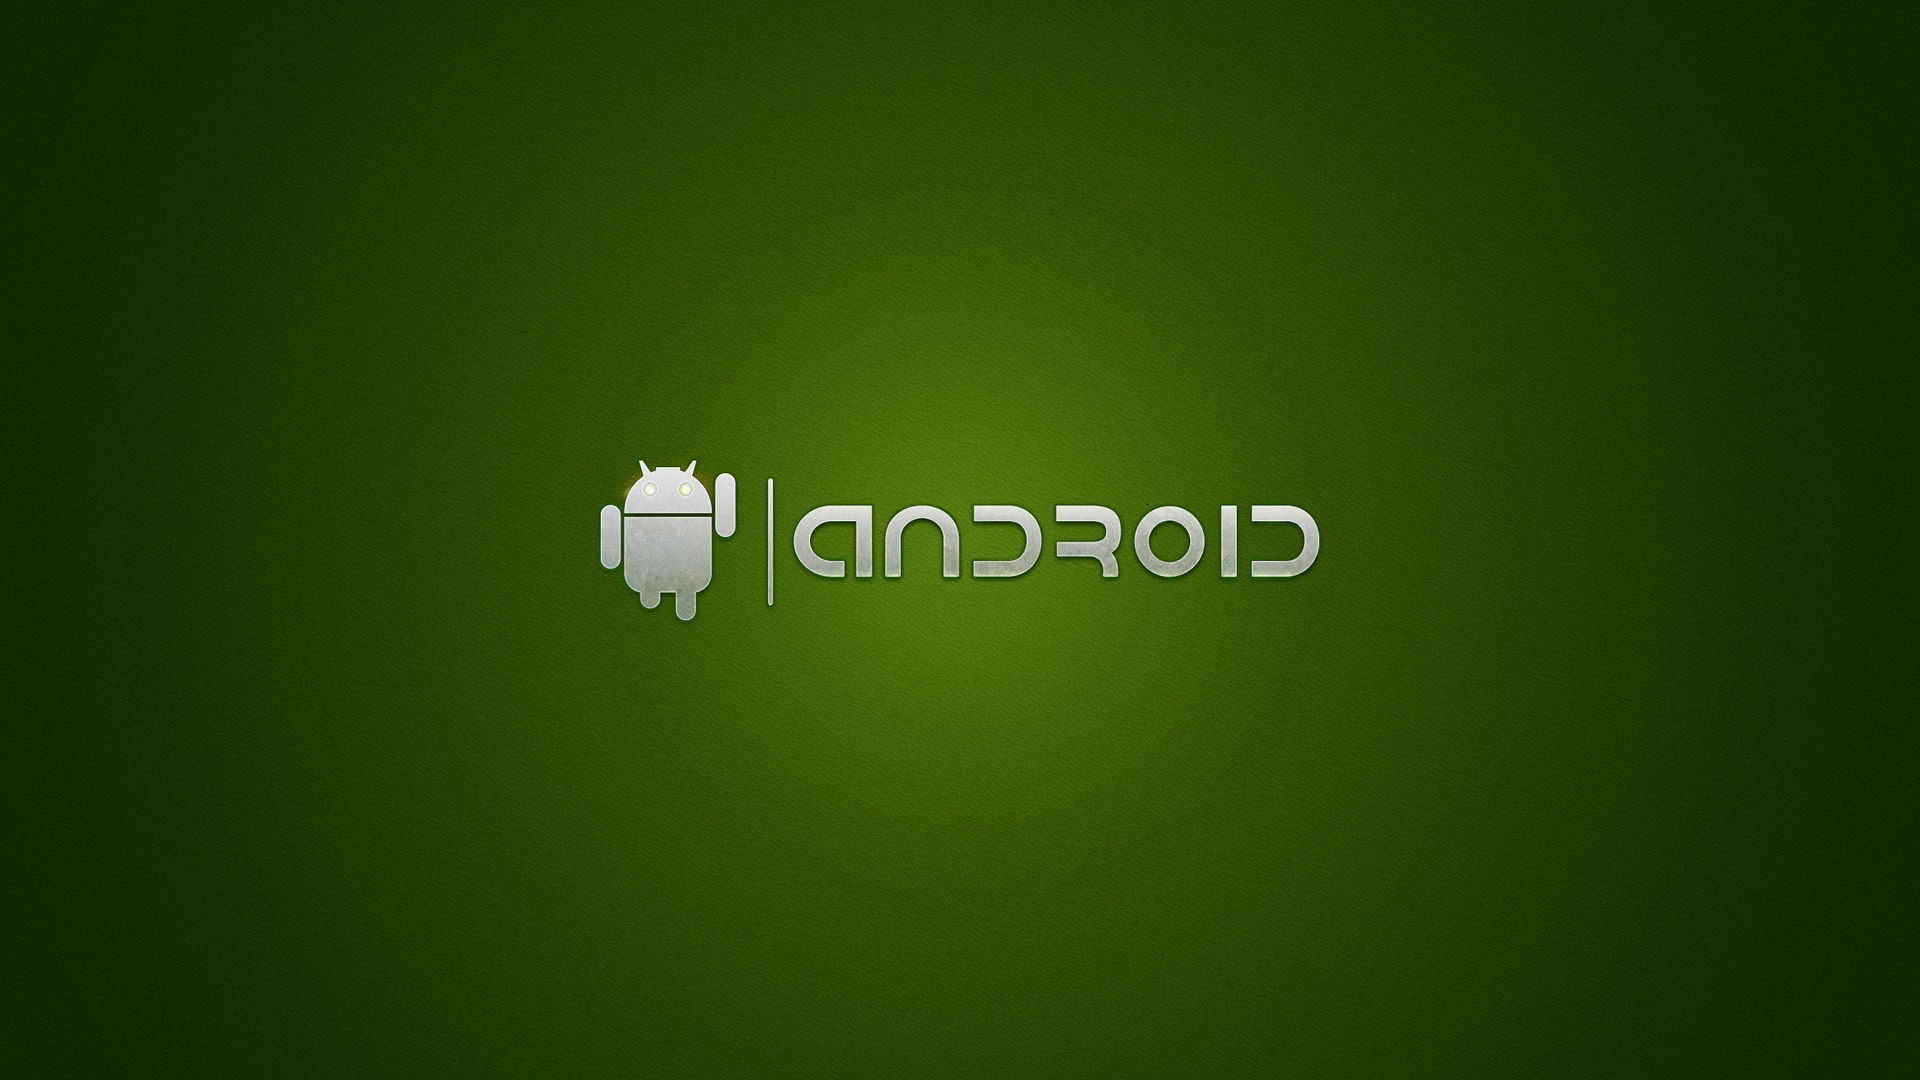 High Quality Android Wallpaper Desktop S